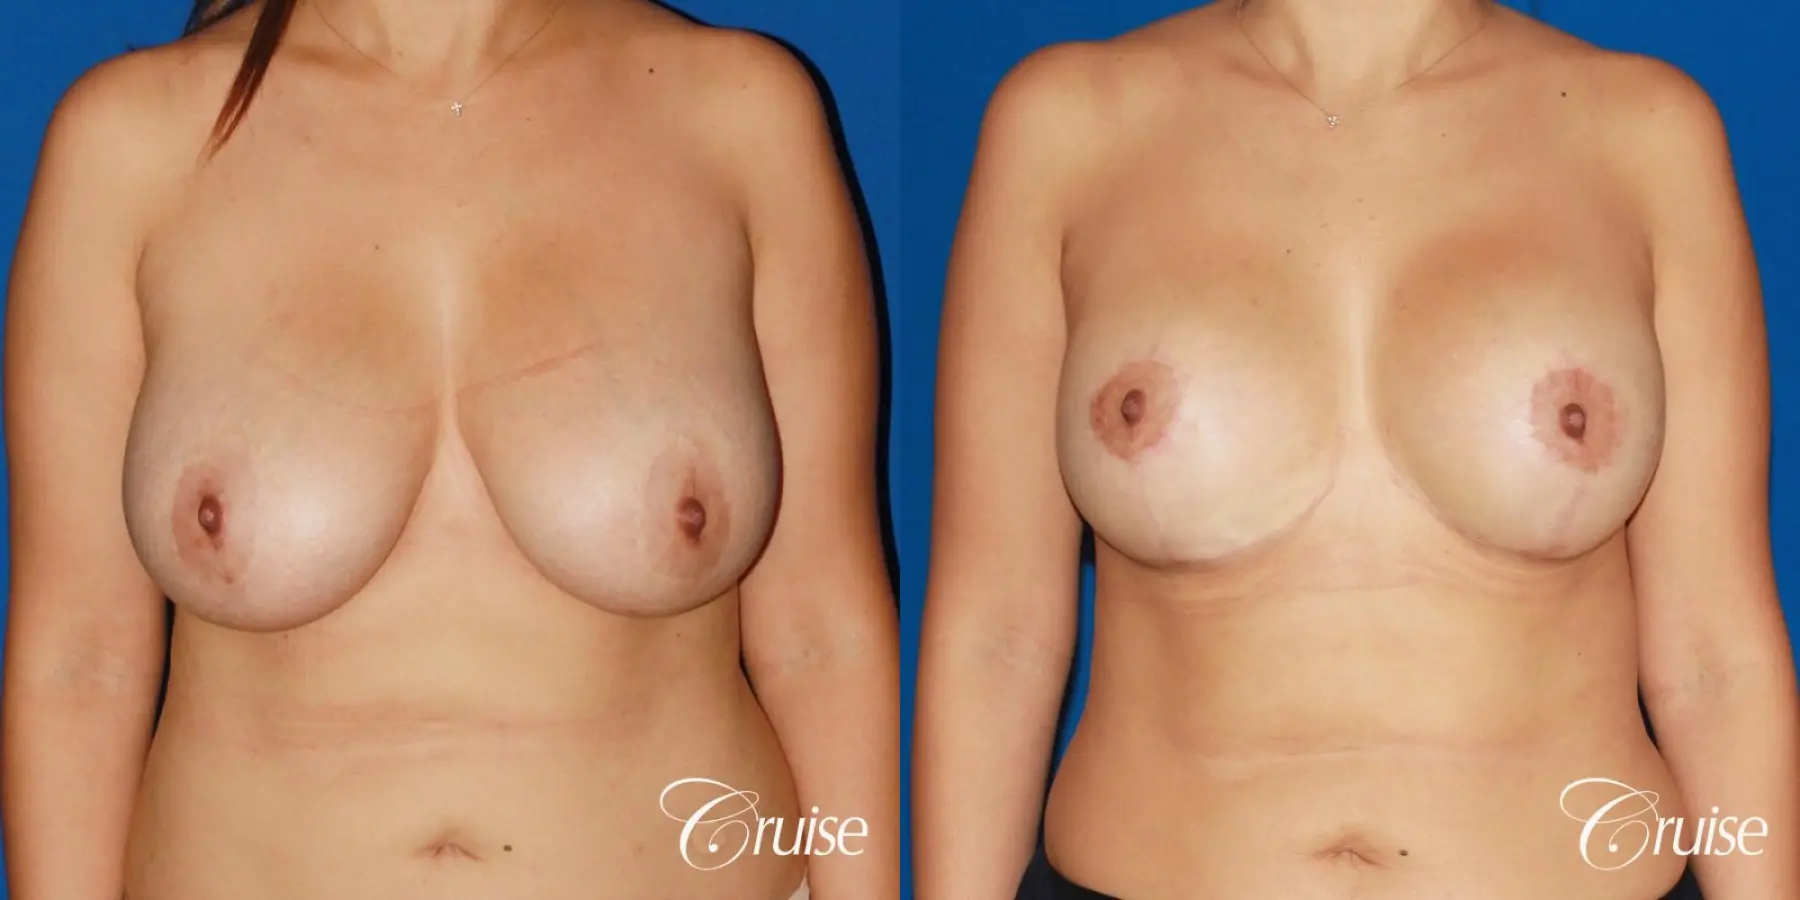 revision breast lift anchor with saline implants - Before and After 1